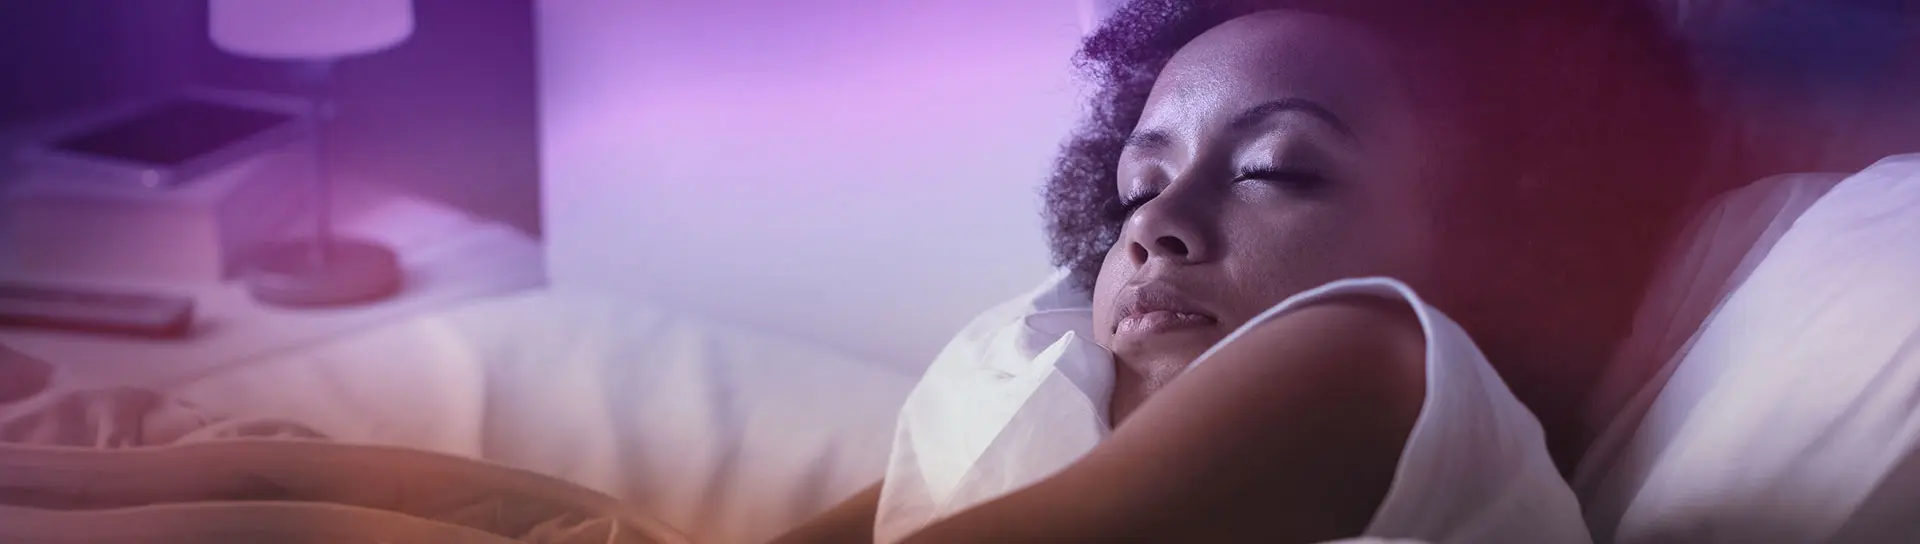 Young African woman sleeping in bed at night, soft light on.